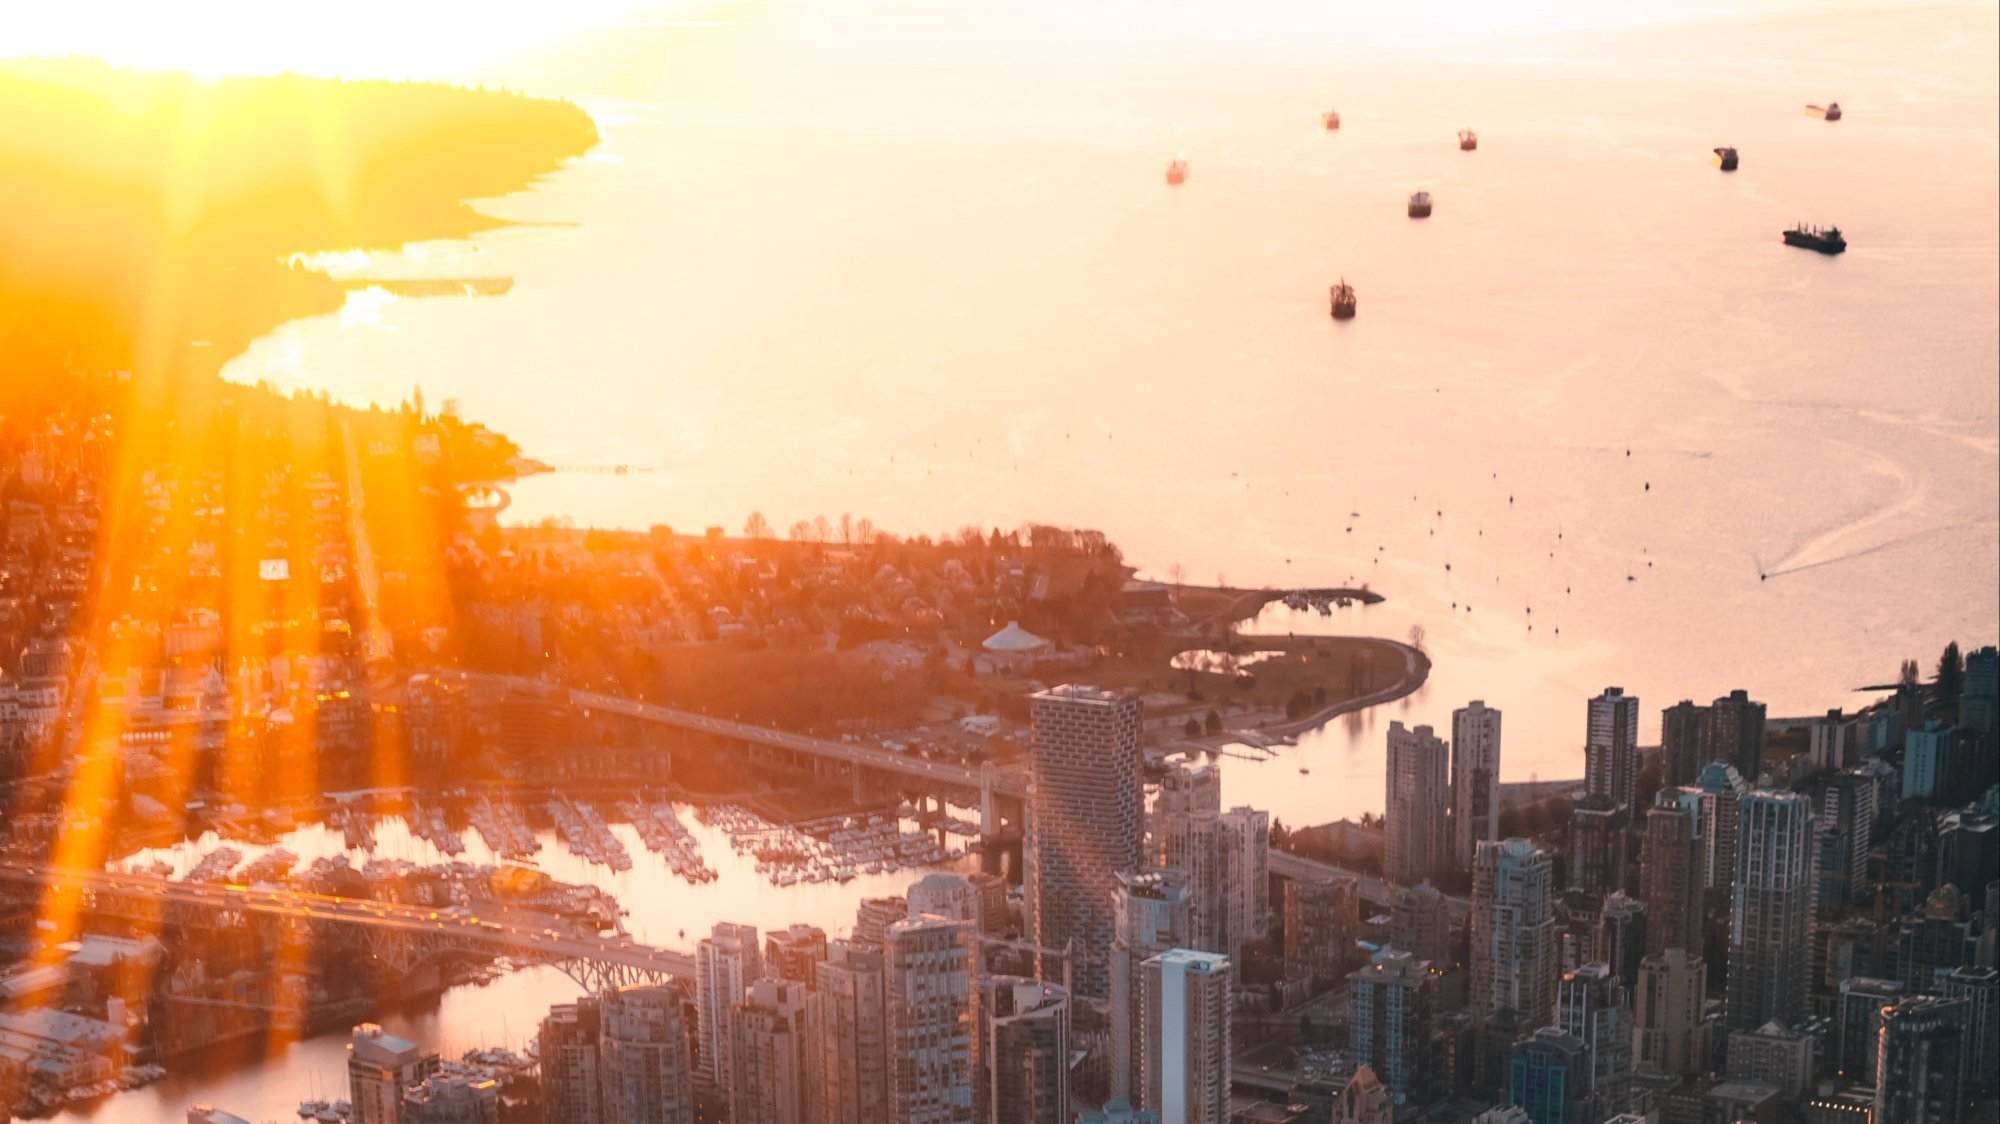 An aerial view of Vancouver at sunset.